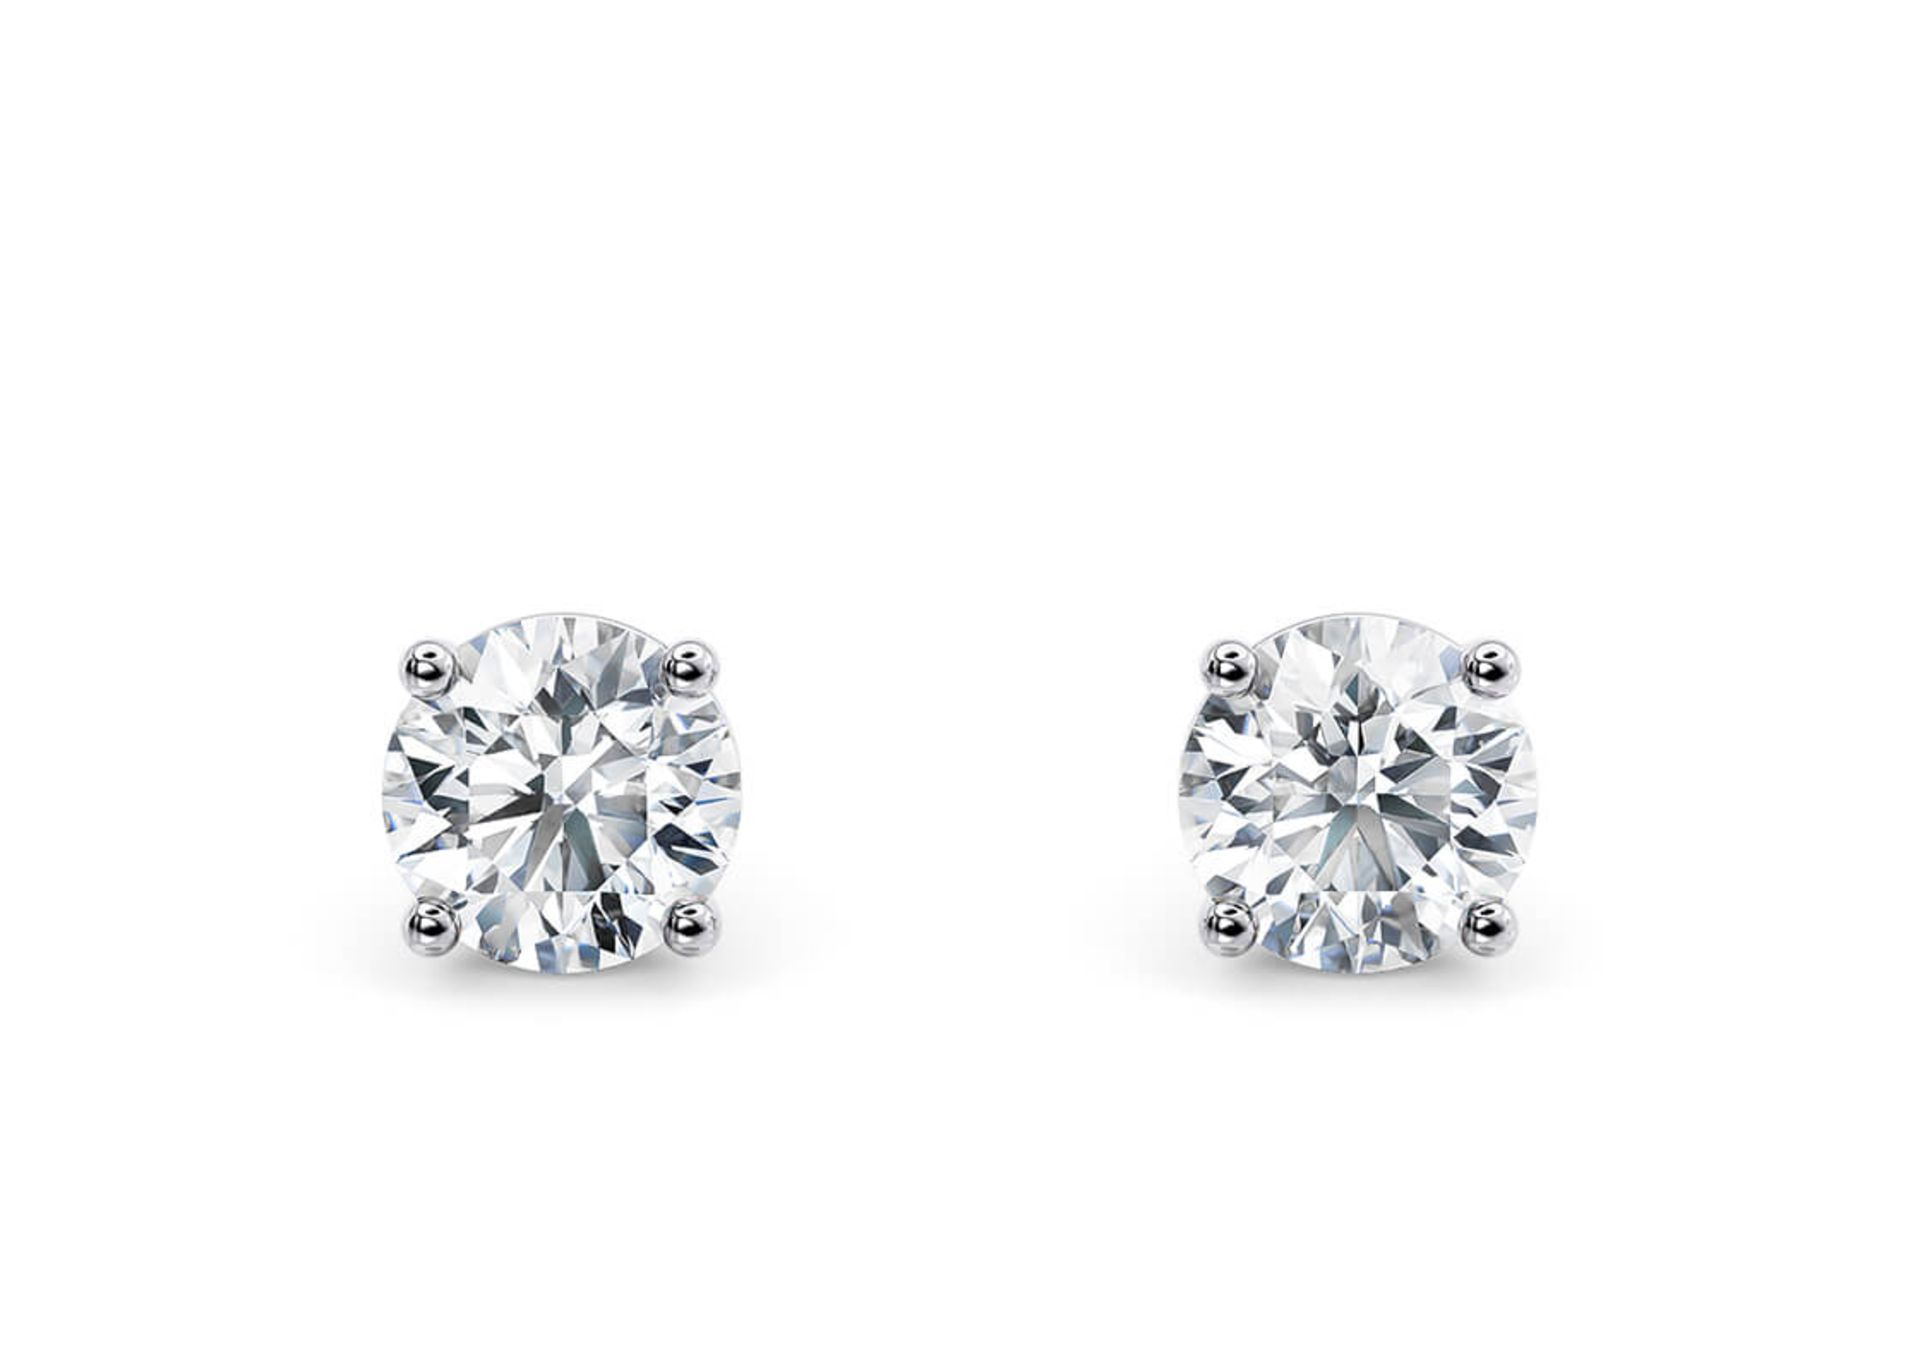 Round Brilliant Cut 3.00 Carat Natural Diamond Earrings 18kt White Gold - Colour F - VS Clarity- GIA - Image 2 of 3